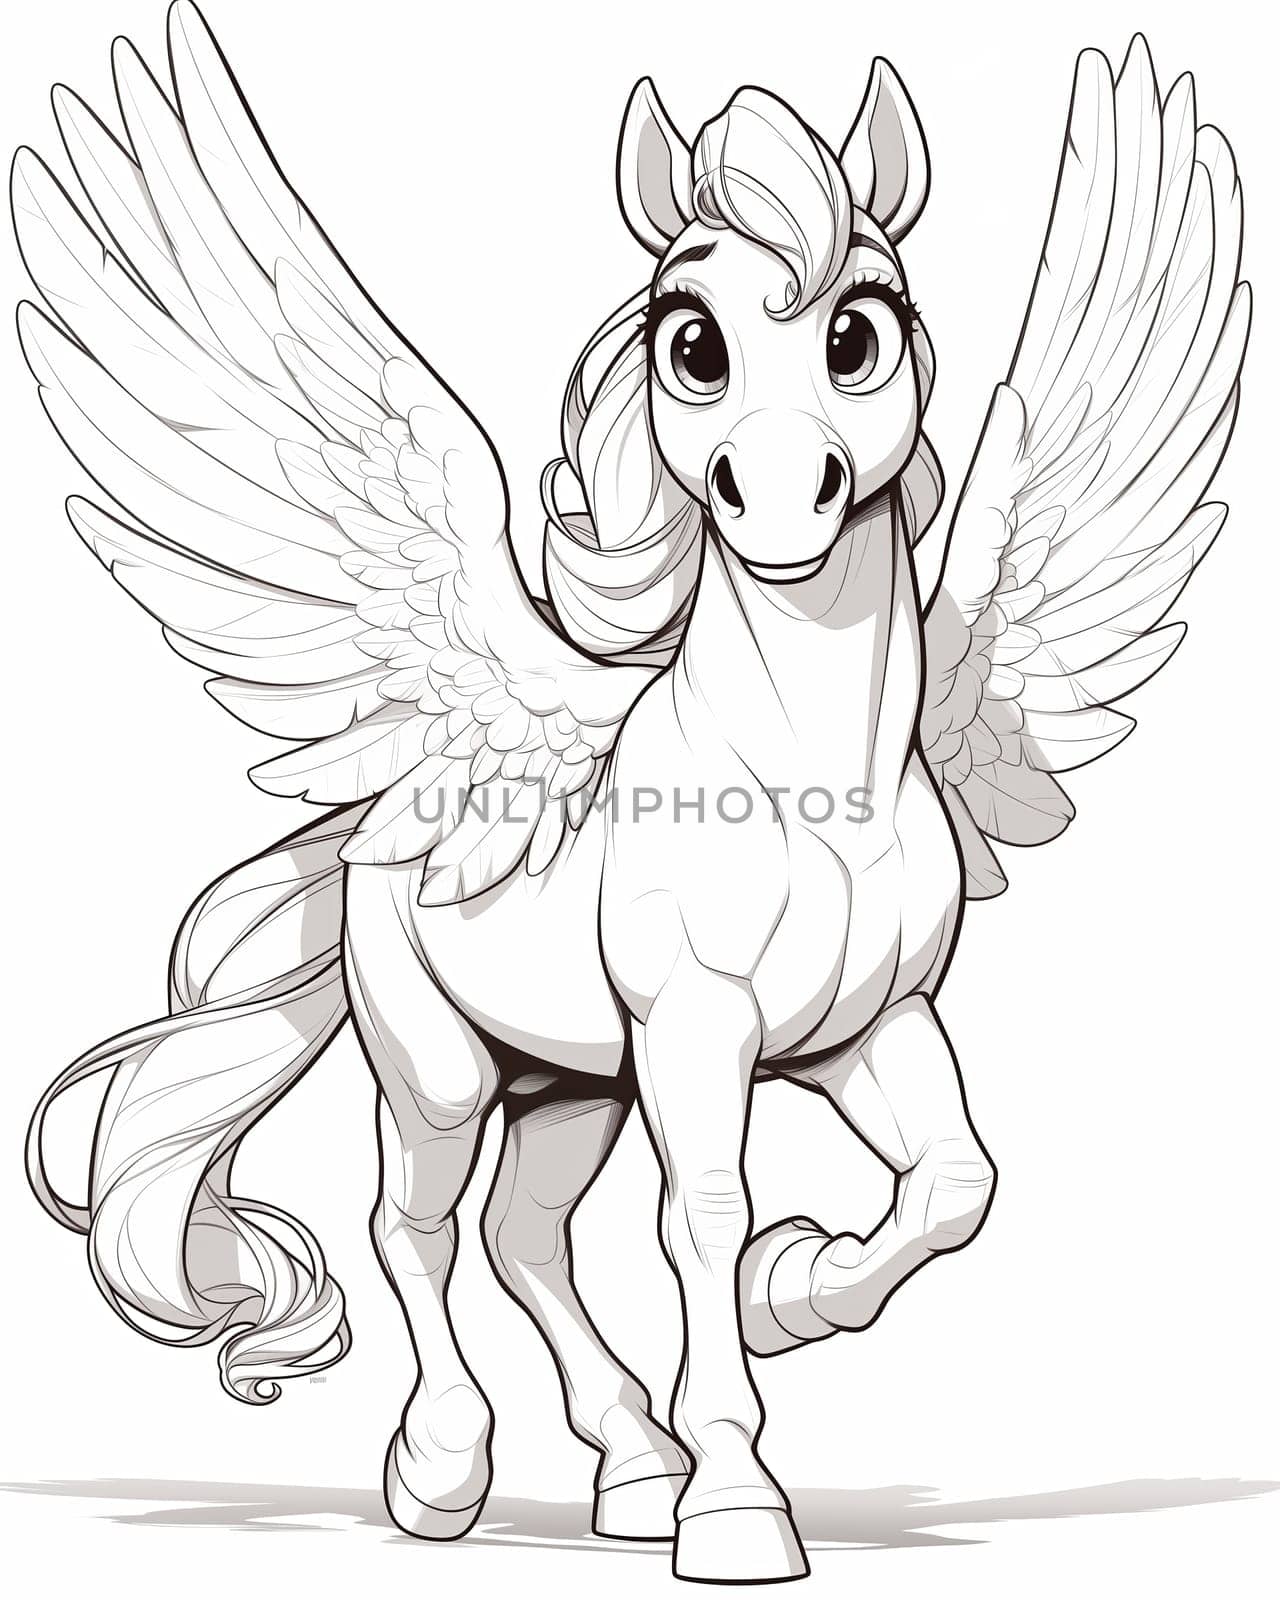 Coloring book for kids, animal coloring, pegasus, unicorn. by Fischeron